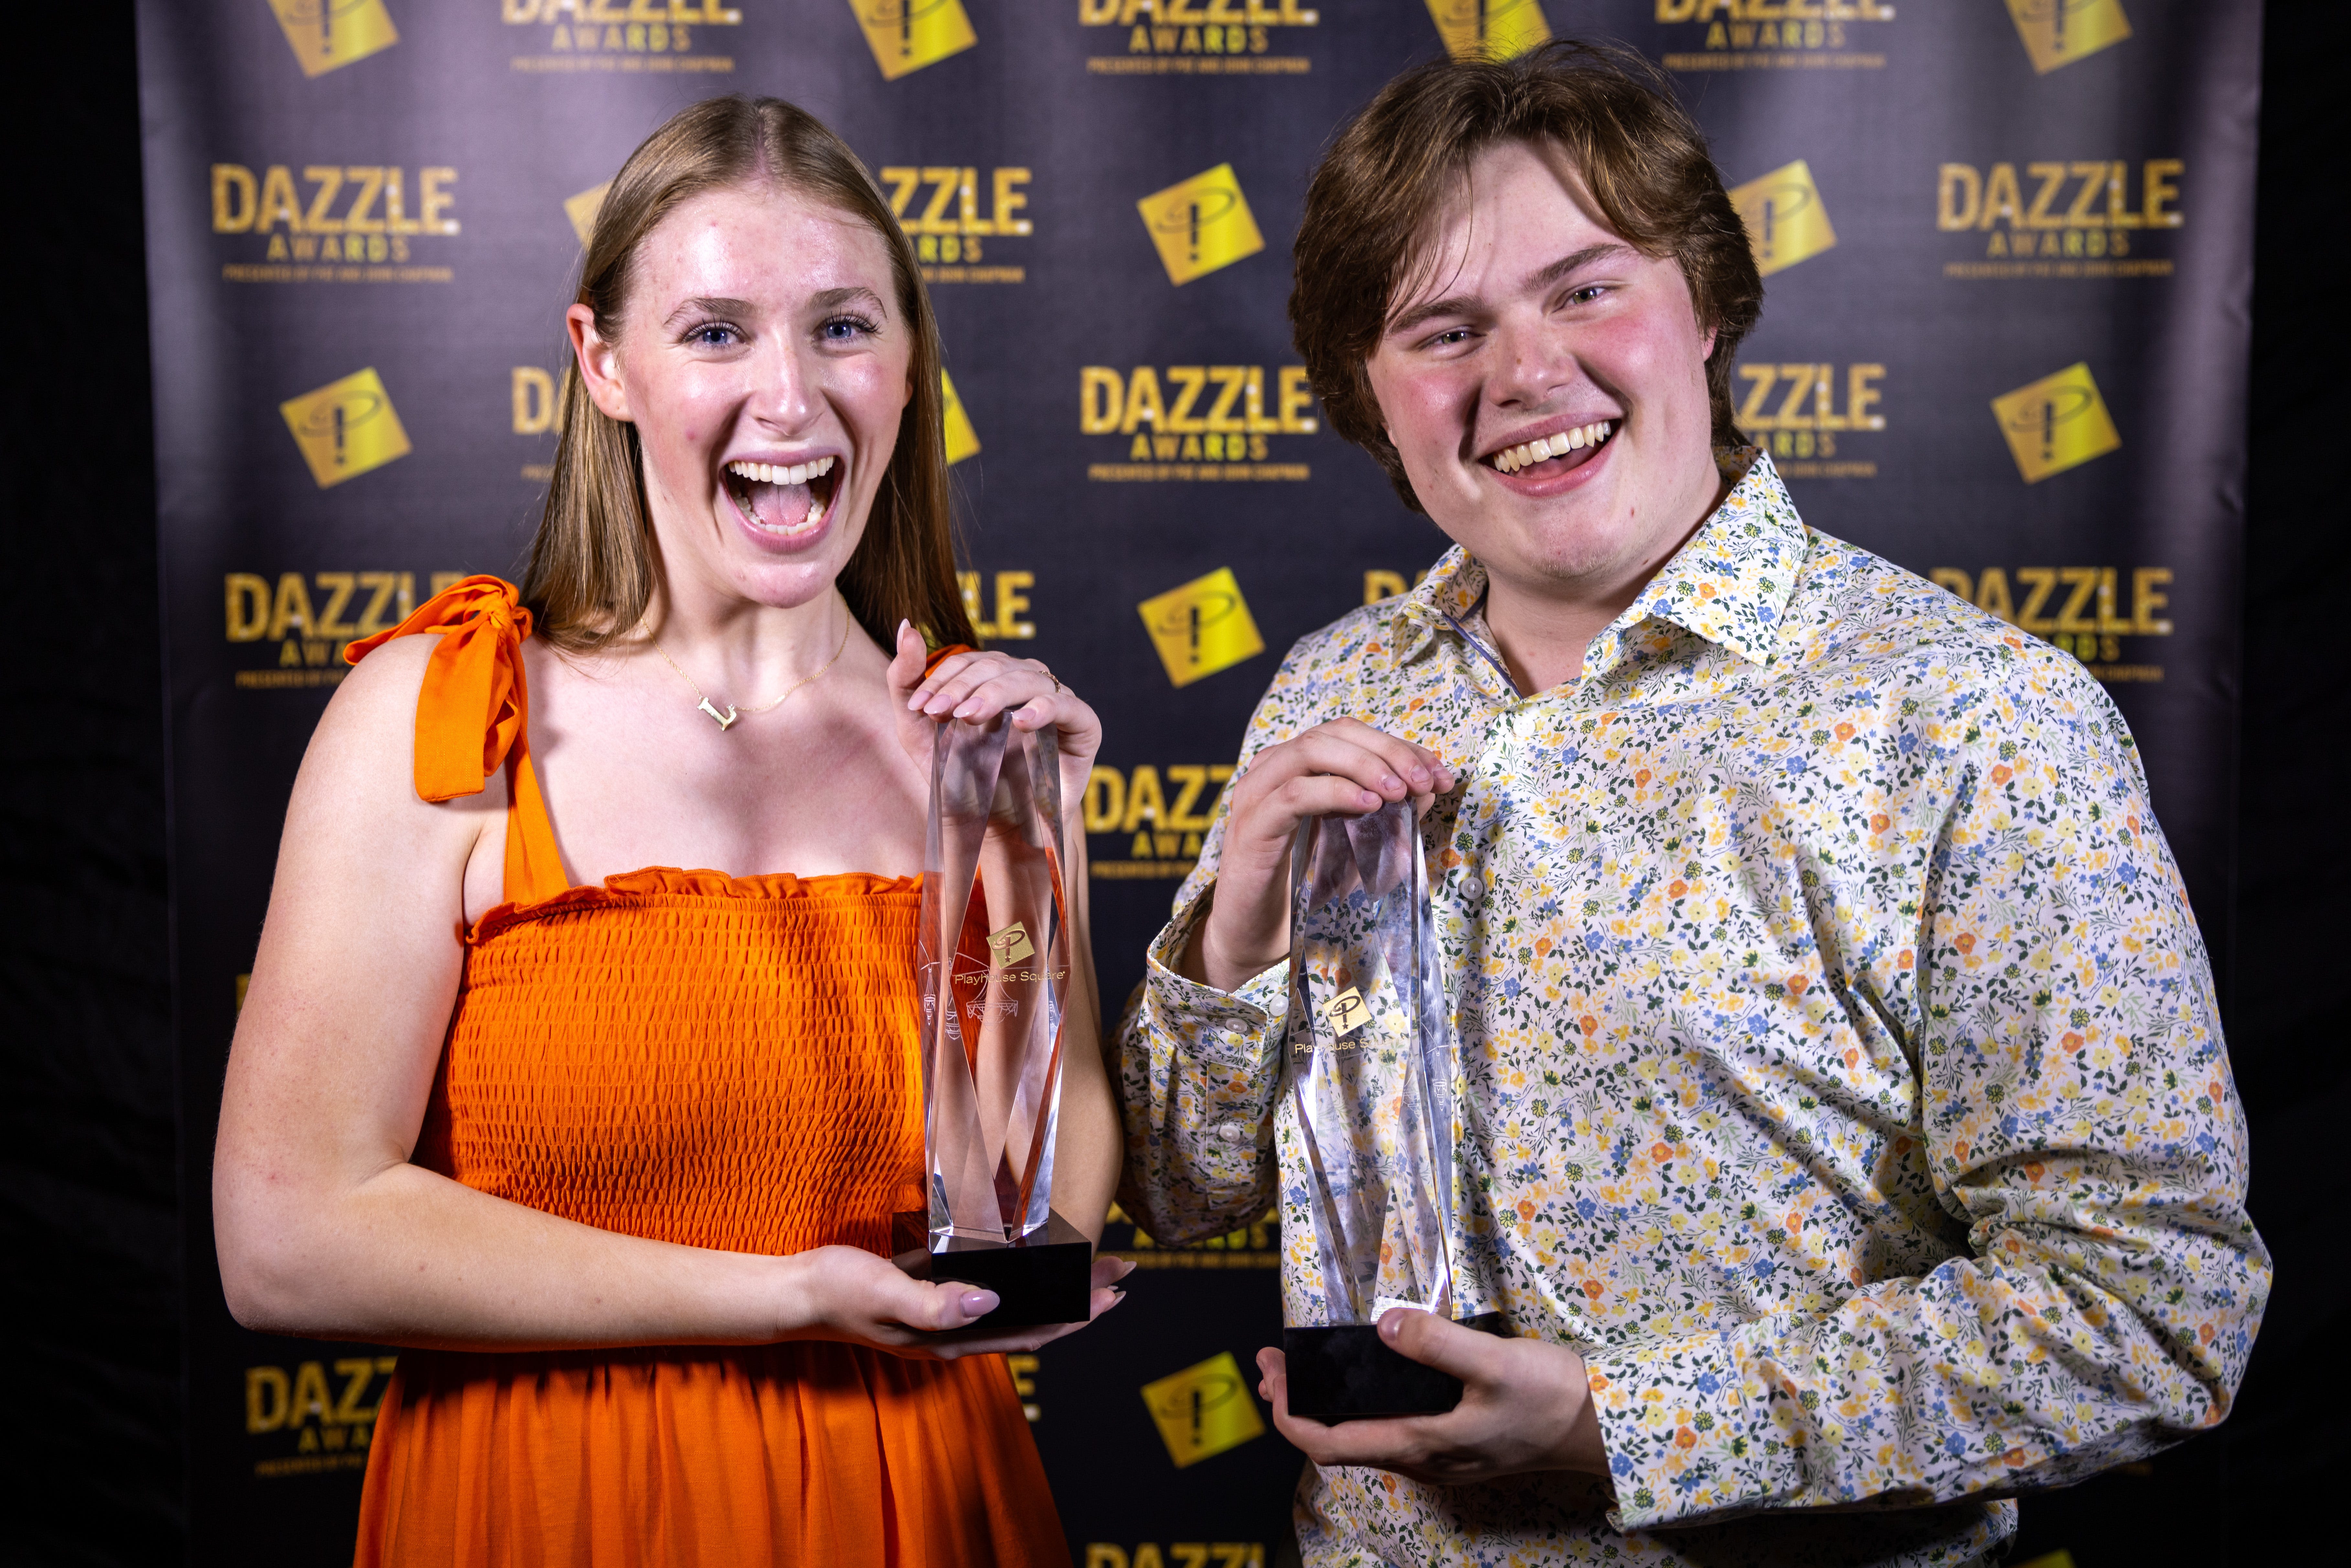 Dazzle winners from Firestone, Hudson head for New York musical theater competition